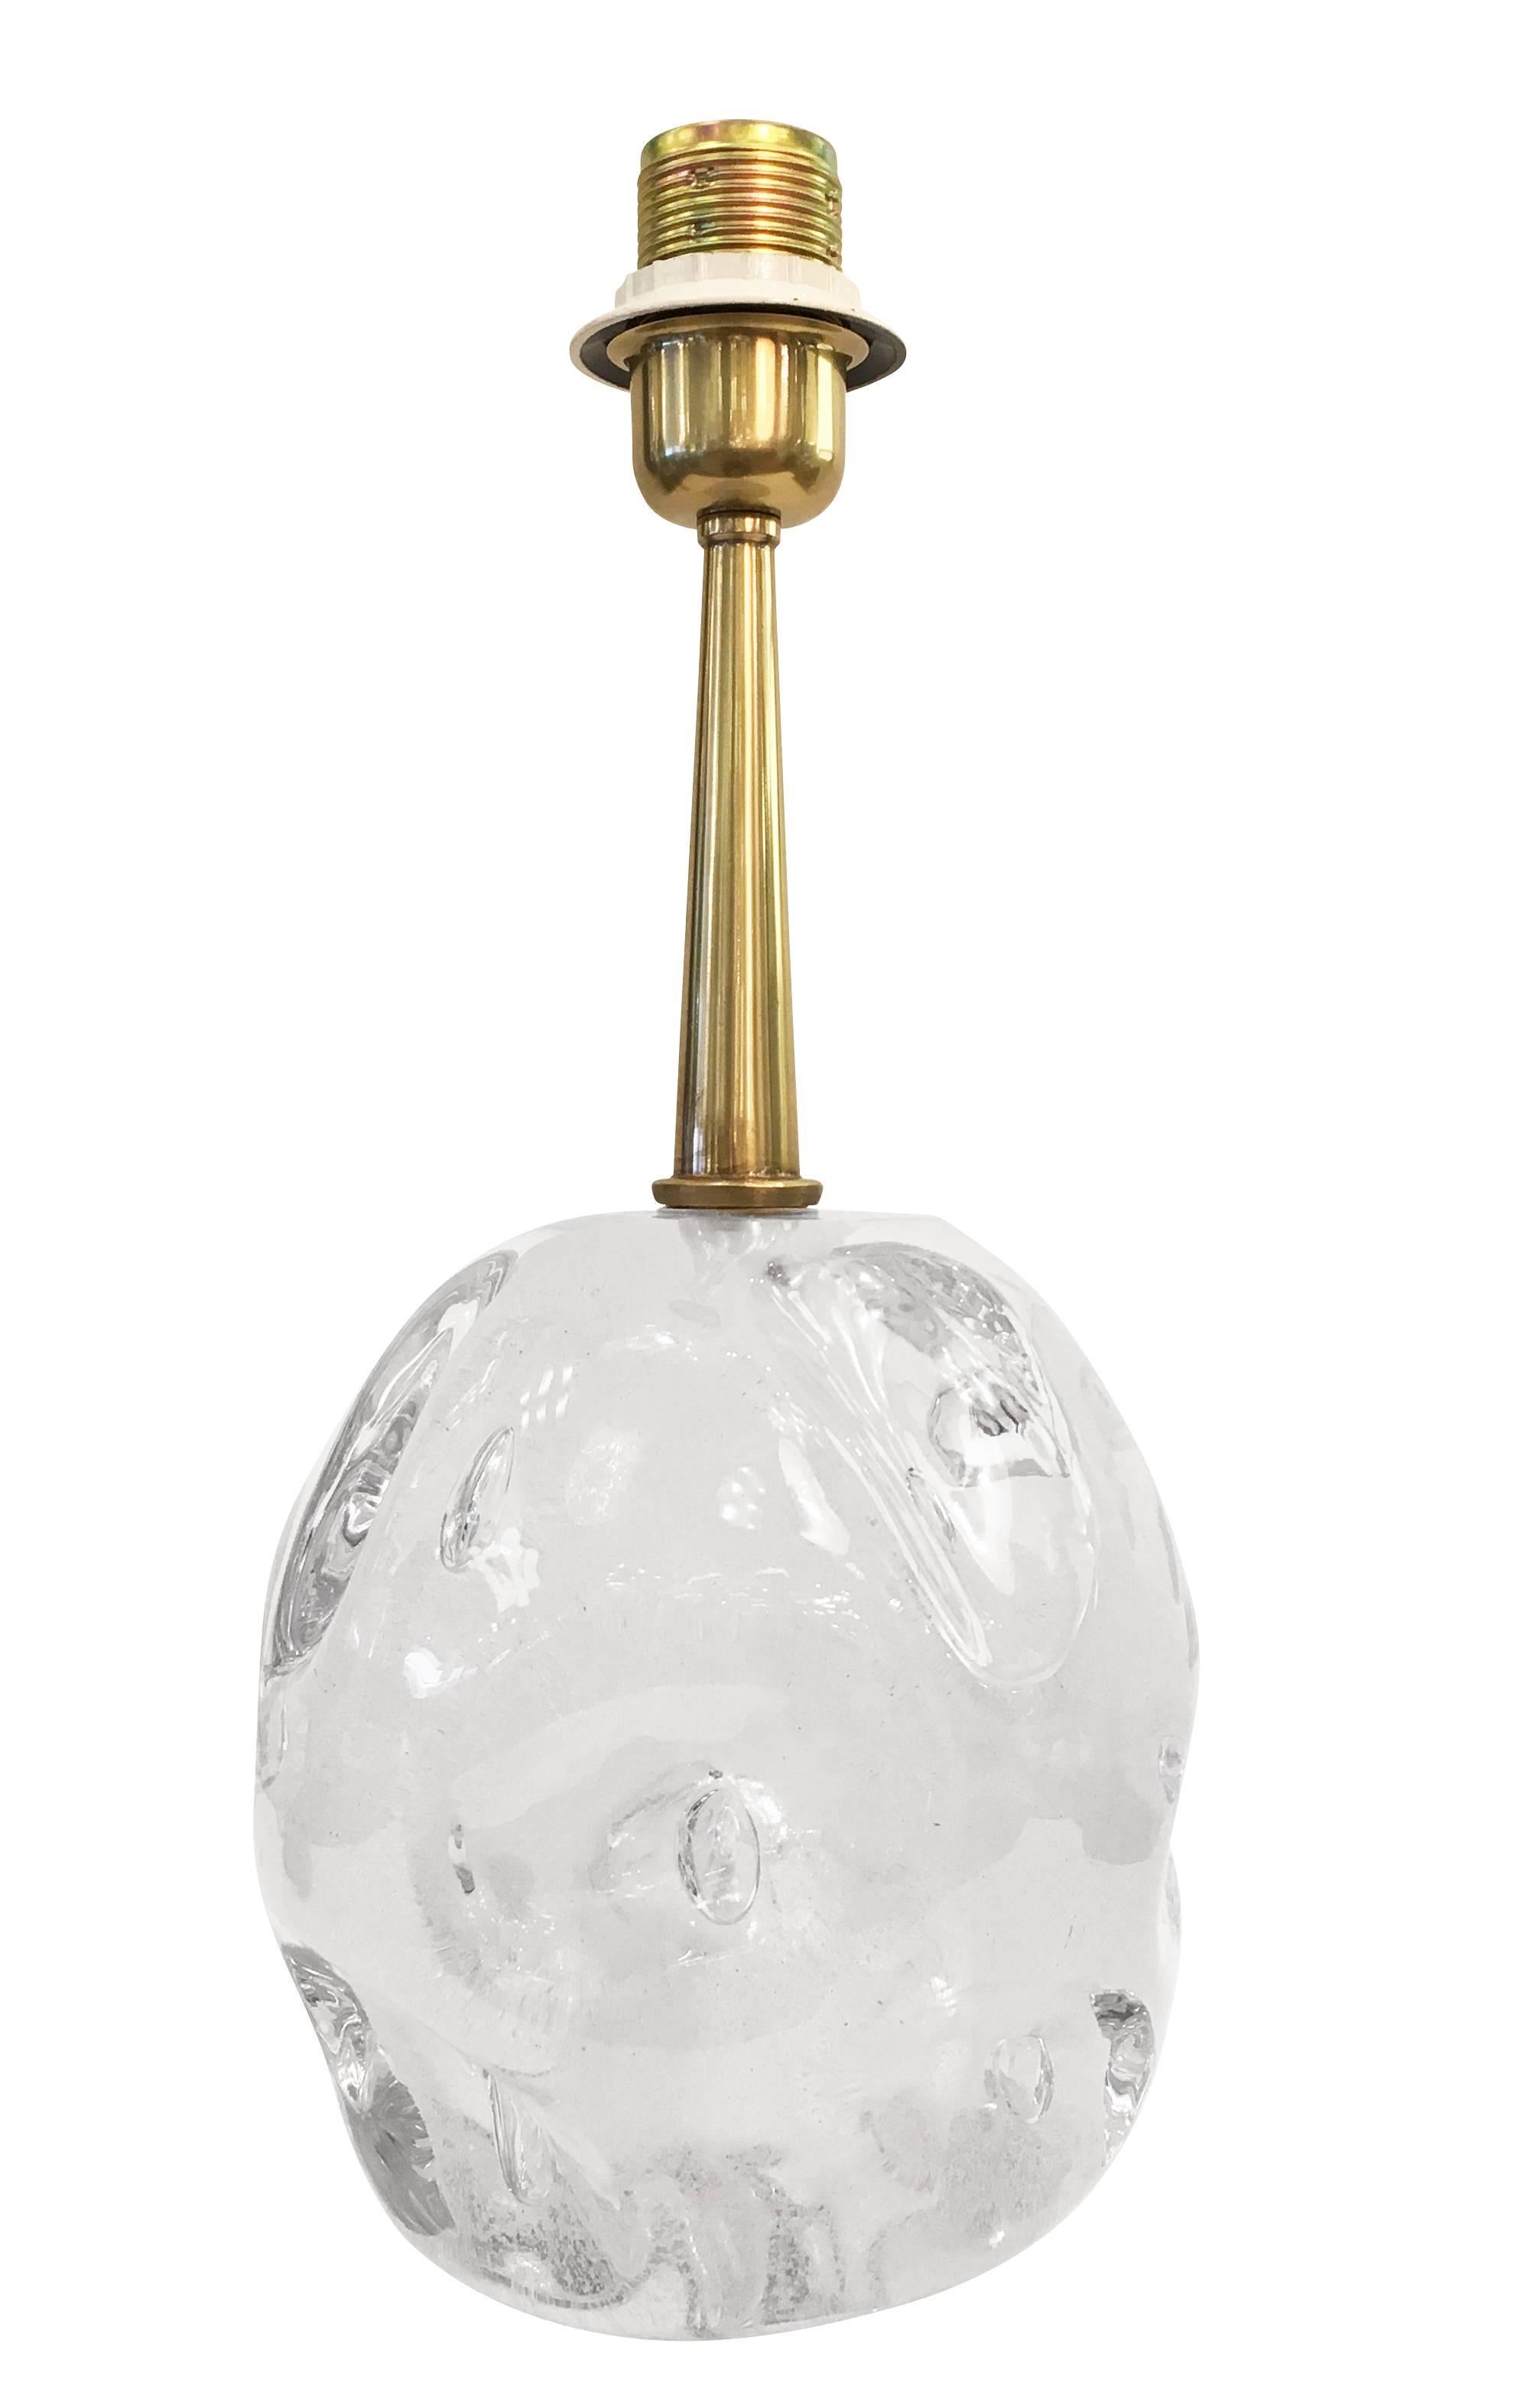 Table lamp manufactured by Esperia for Gaspare Asaro featuring a round hand worked glass amber. The irregular glass is infused with bubbles big and small, giving it an organic feel. Brass hardware. Shade included.

Measures: Diameter: 14” with